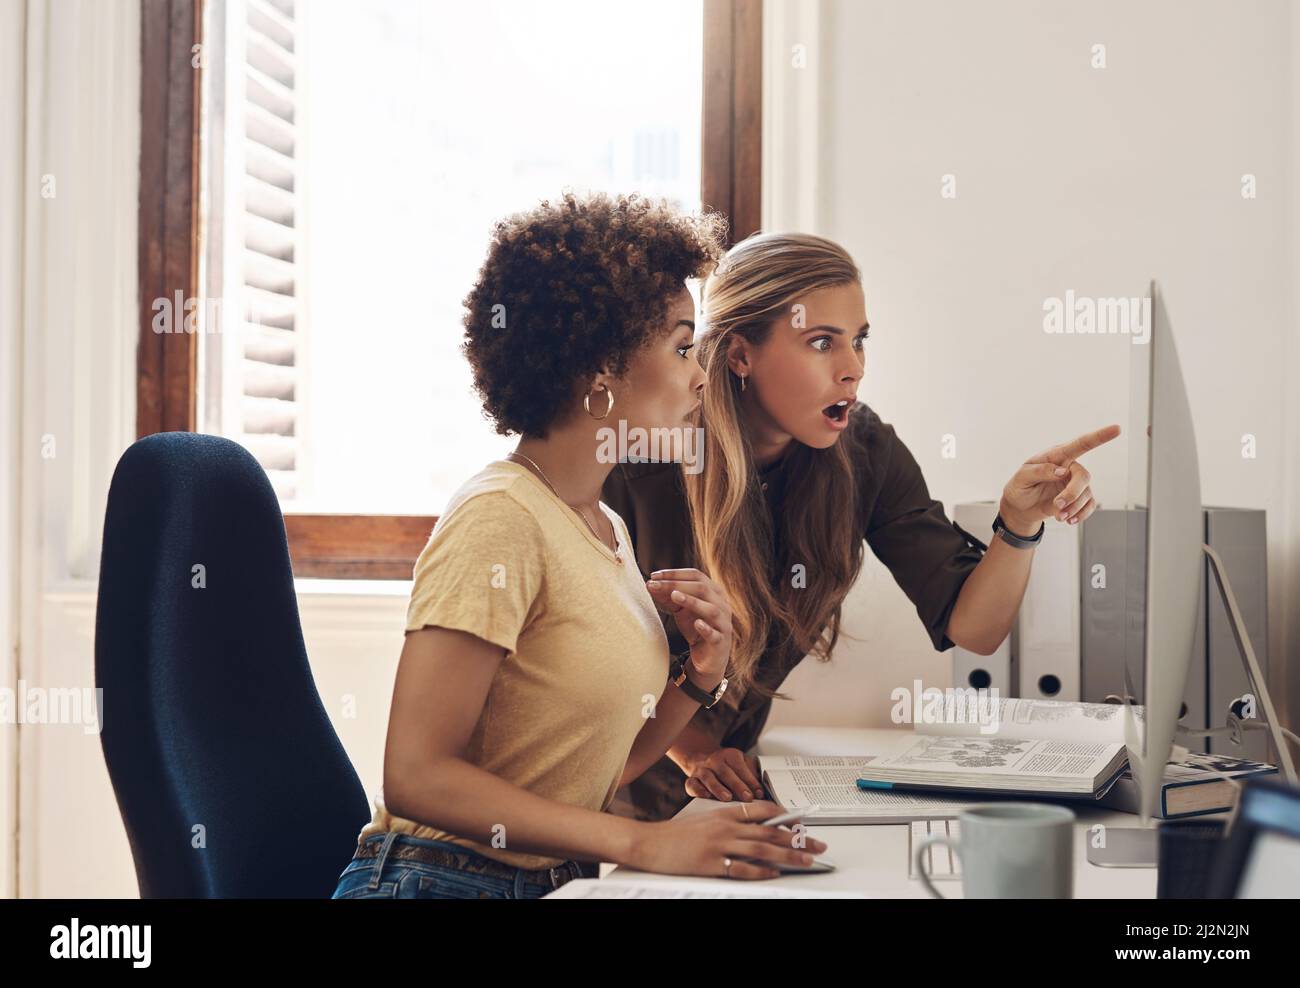 Are you seeing this too. Shot of two businesswomen looking surprised while working together on a computer in an office. Stock Photo